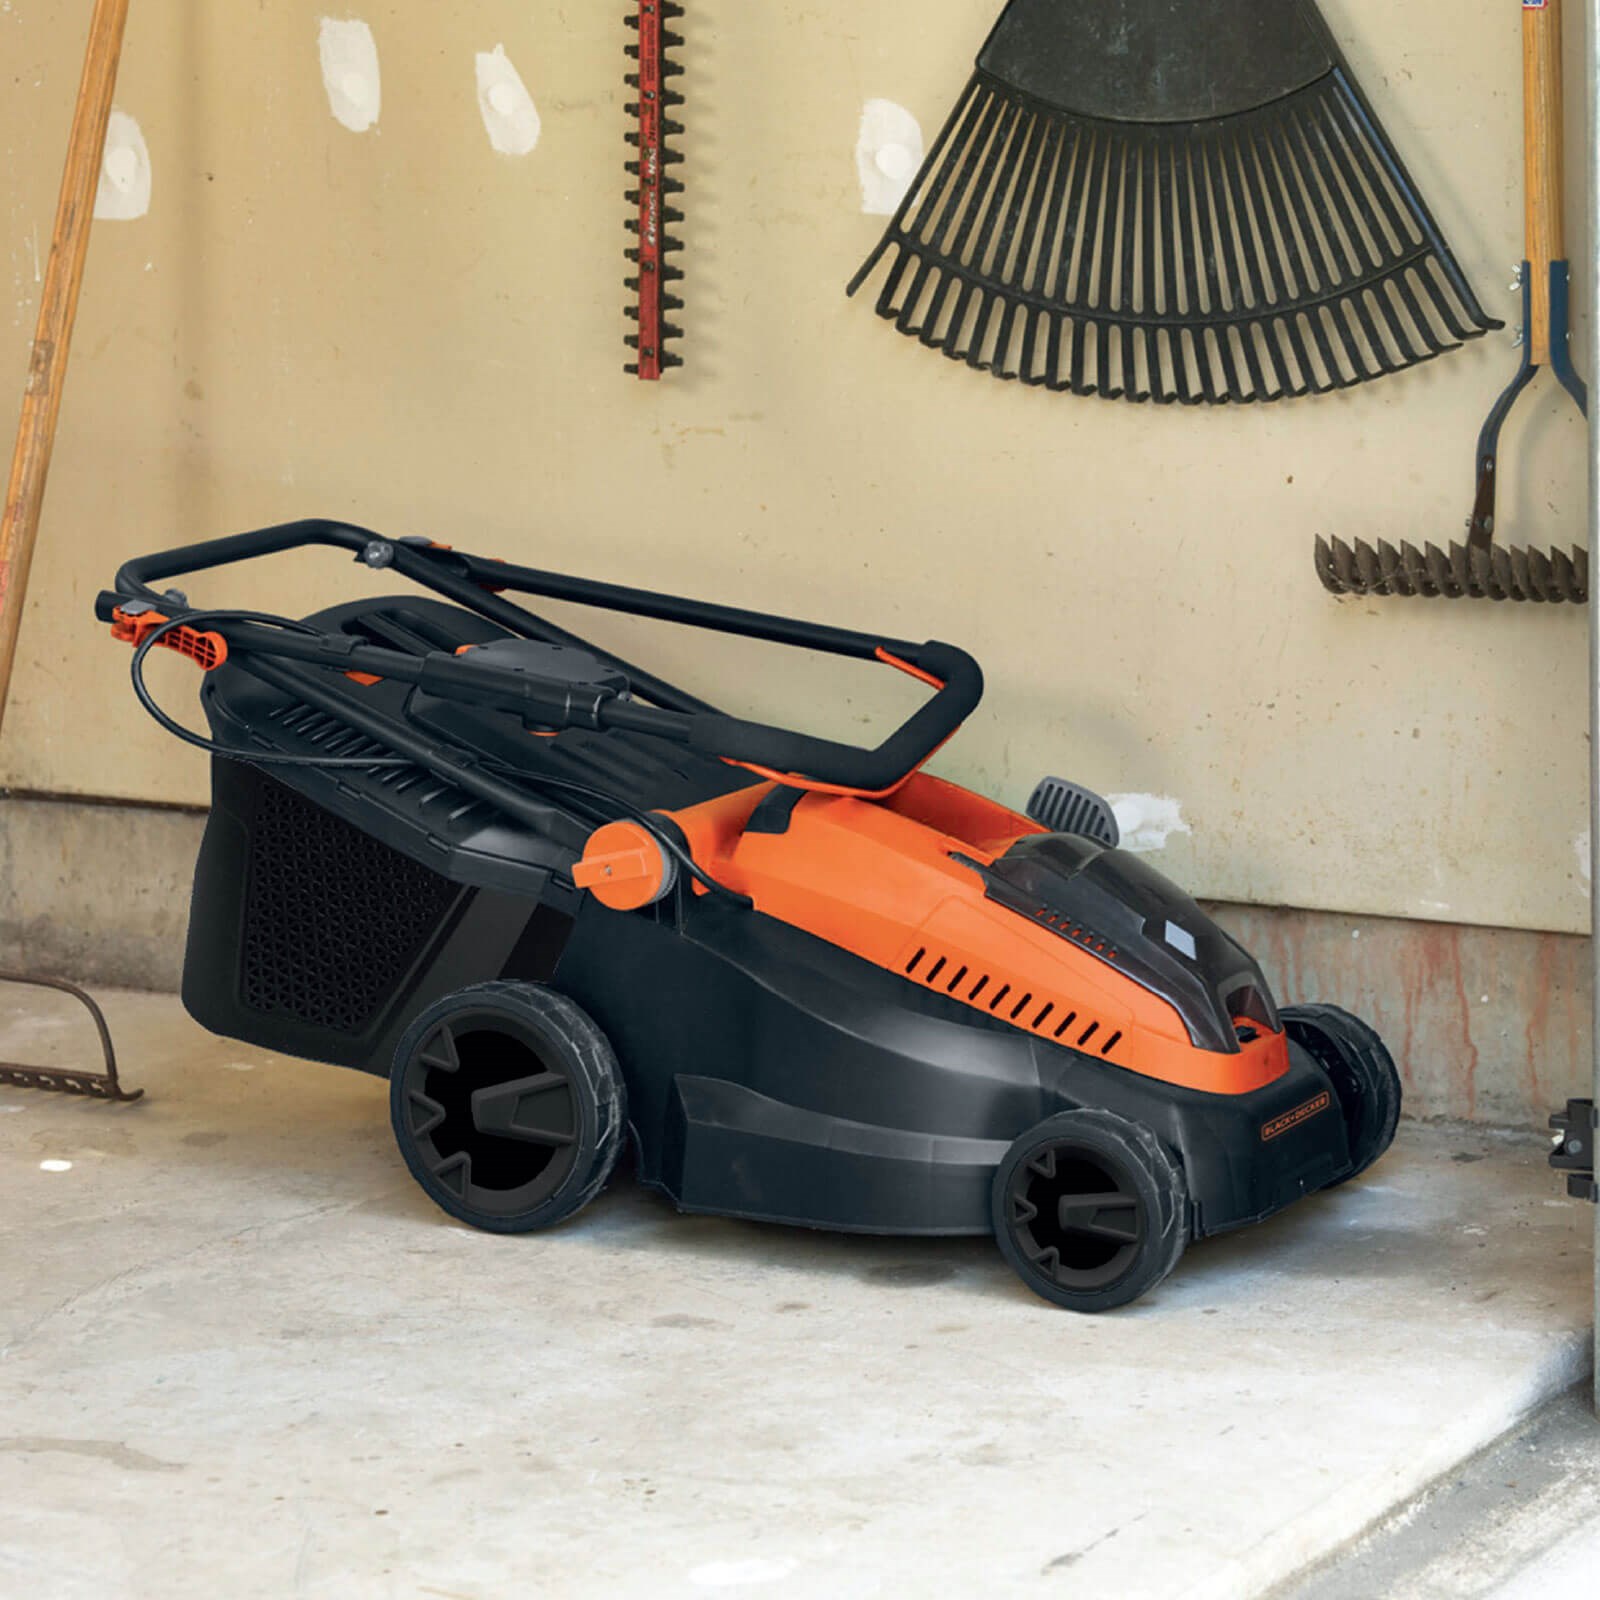 Black and Decker CLM3820L 36v Cordless Rotary Lawnmower 380mm